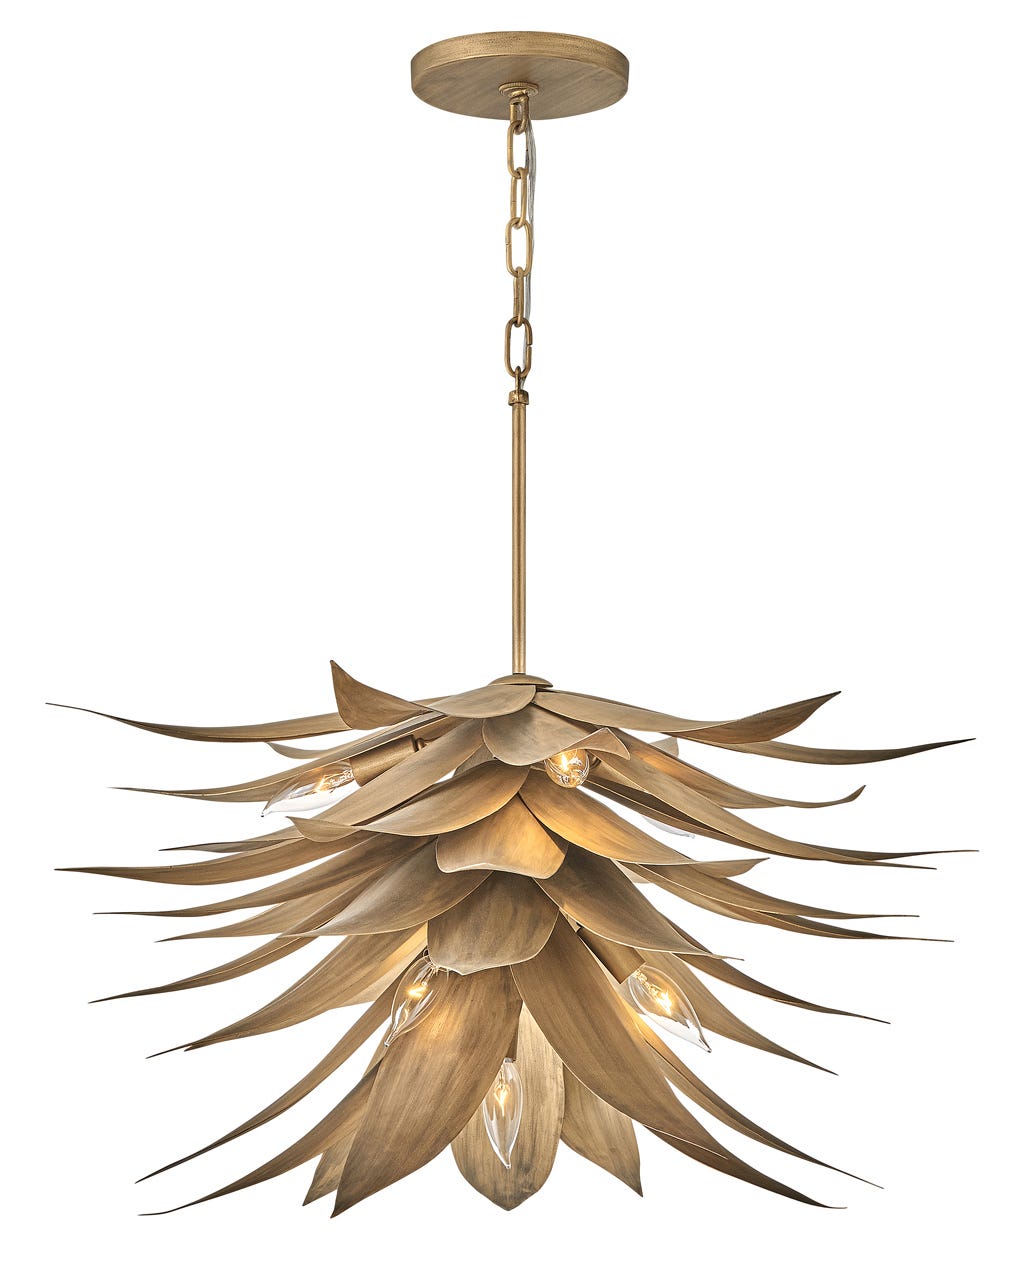 Hinkley Agave Chandelier Chandeliers Hinkley Burnished Gold 26.0x26.0x29.0 